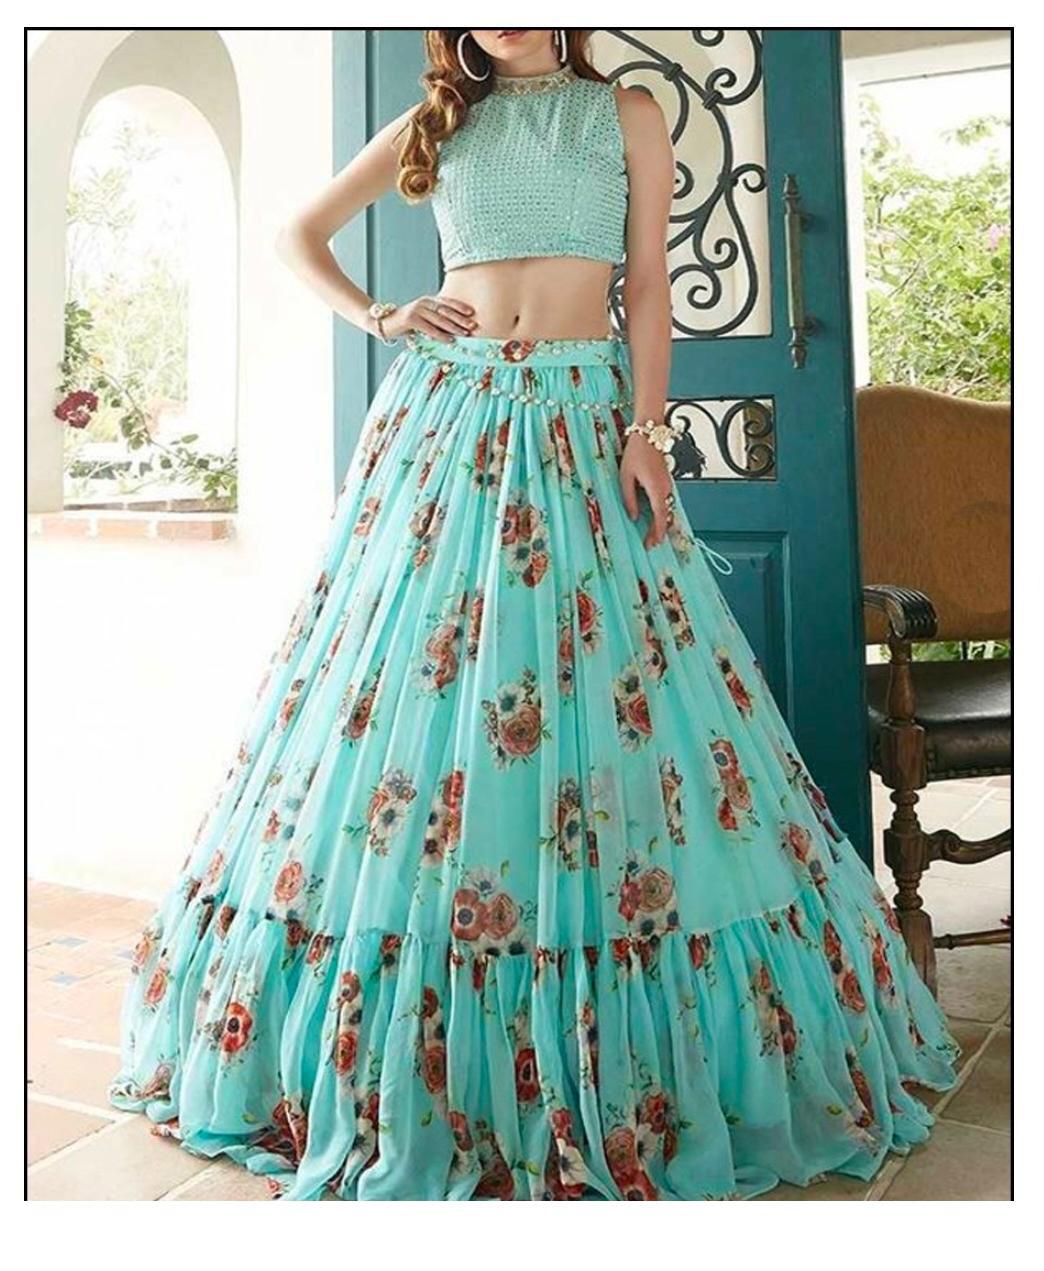 Af Av 97 Printed Faux Georgette Lehenga Collection At Wholes...